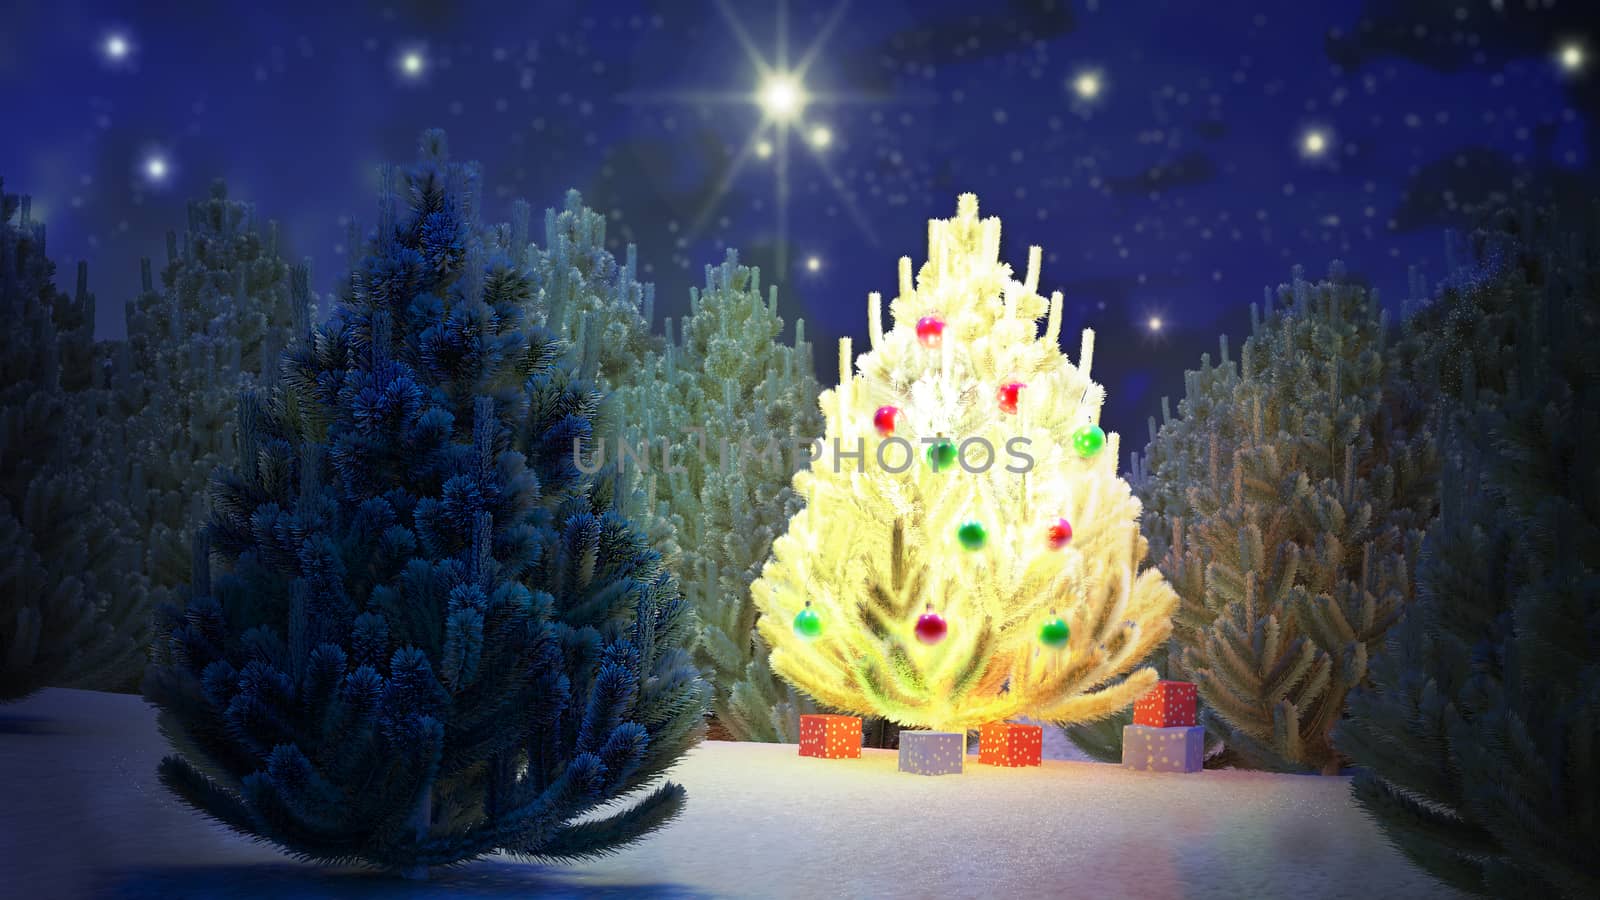 Illustration of a Christmas tree in the middle of a pine forest during the night. The stars sparkle. Calm and quiet landscape.